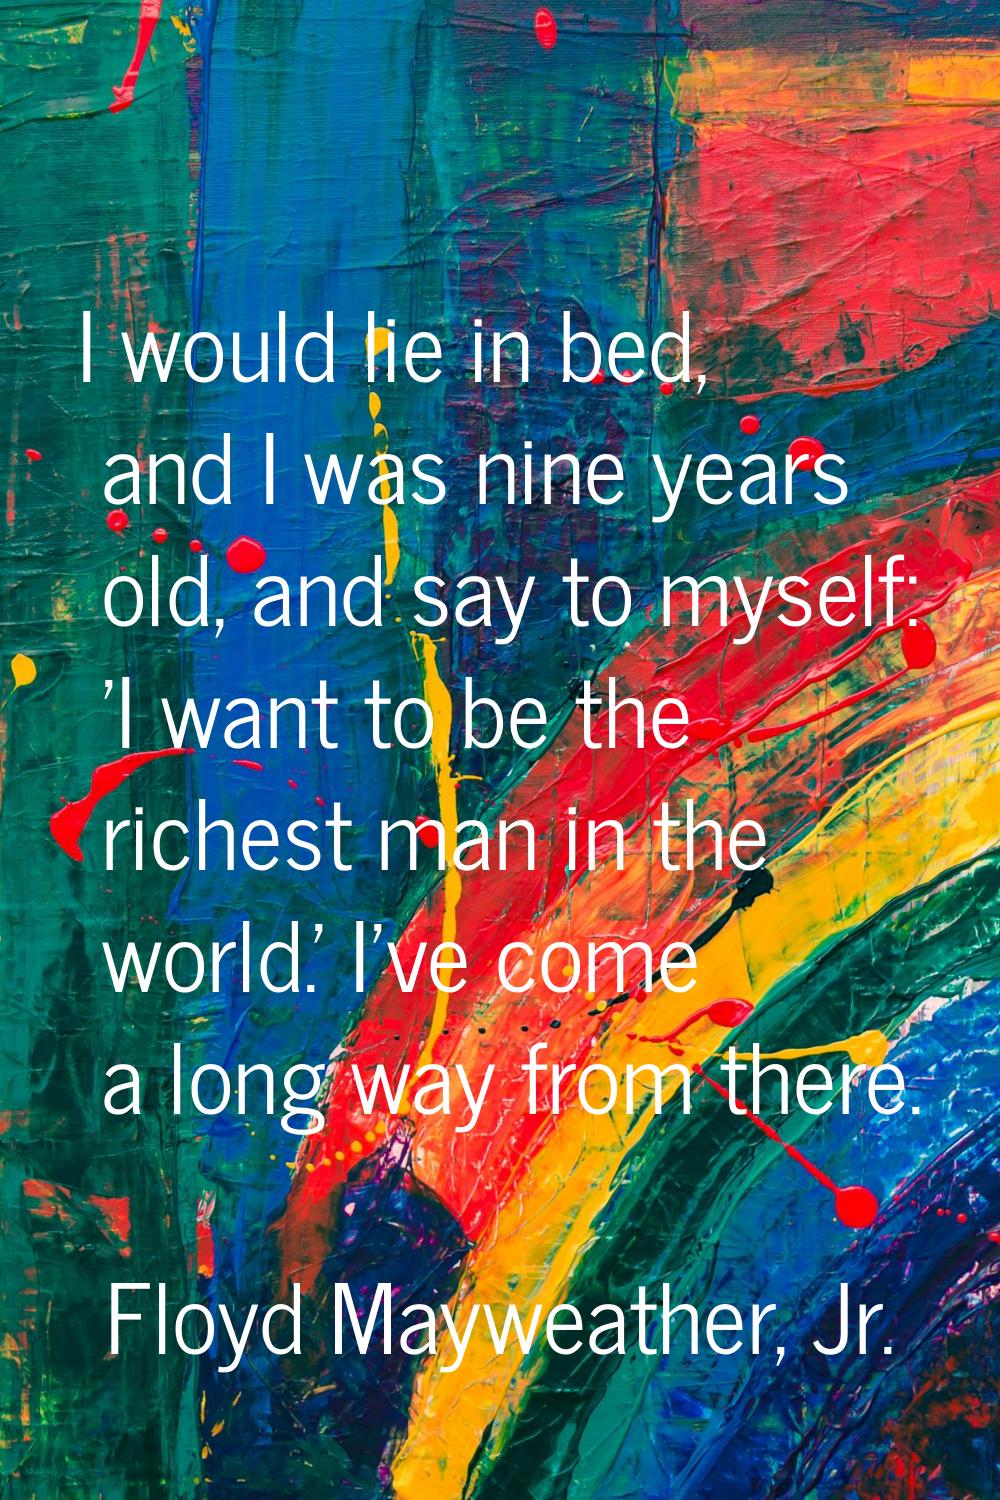 I would lie in bed, and I was nine years old, and say to myself: 'I want to be the richest man in t